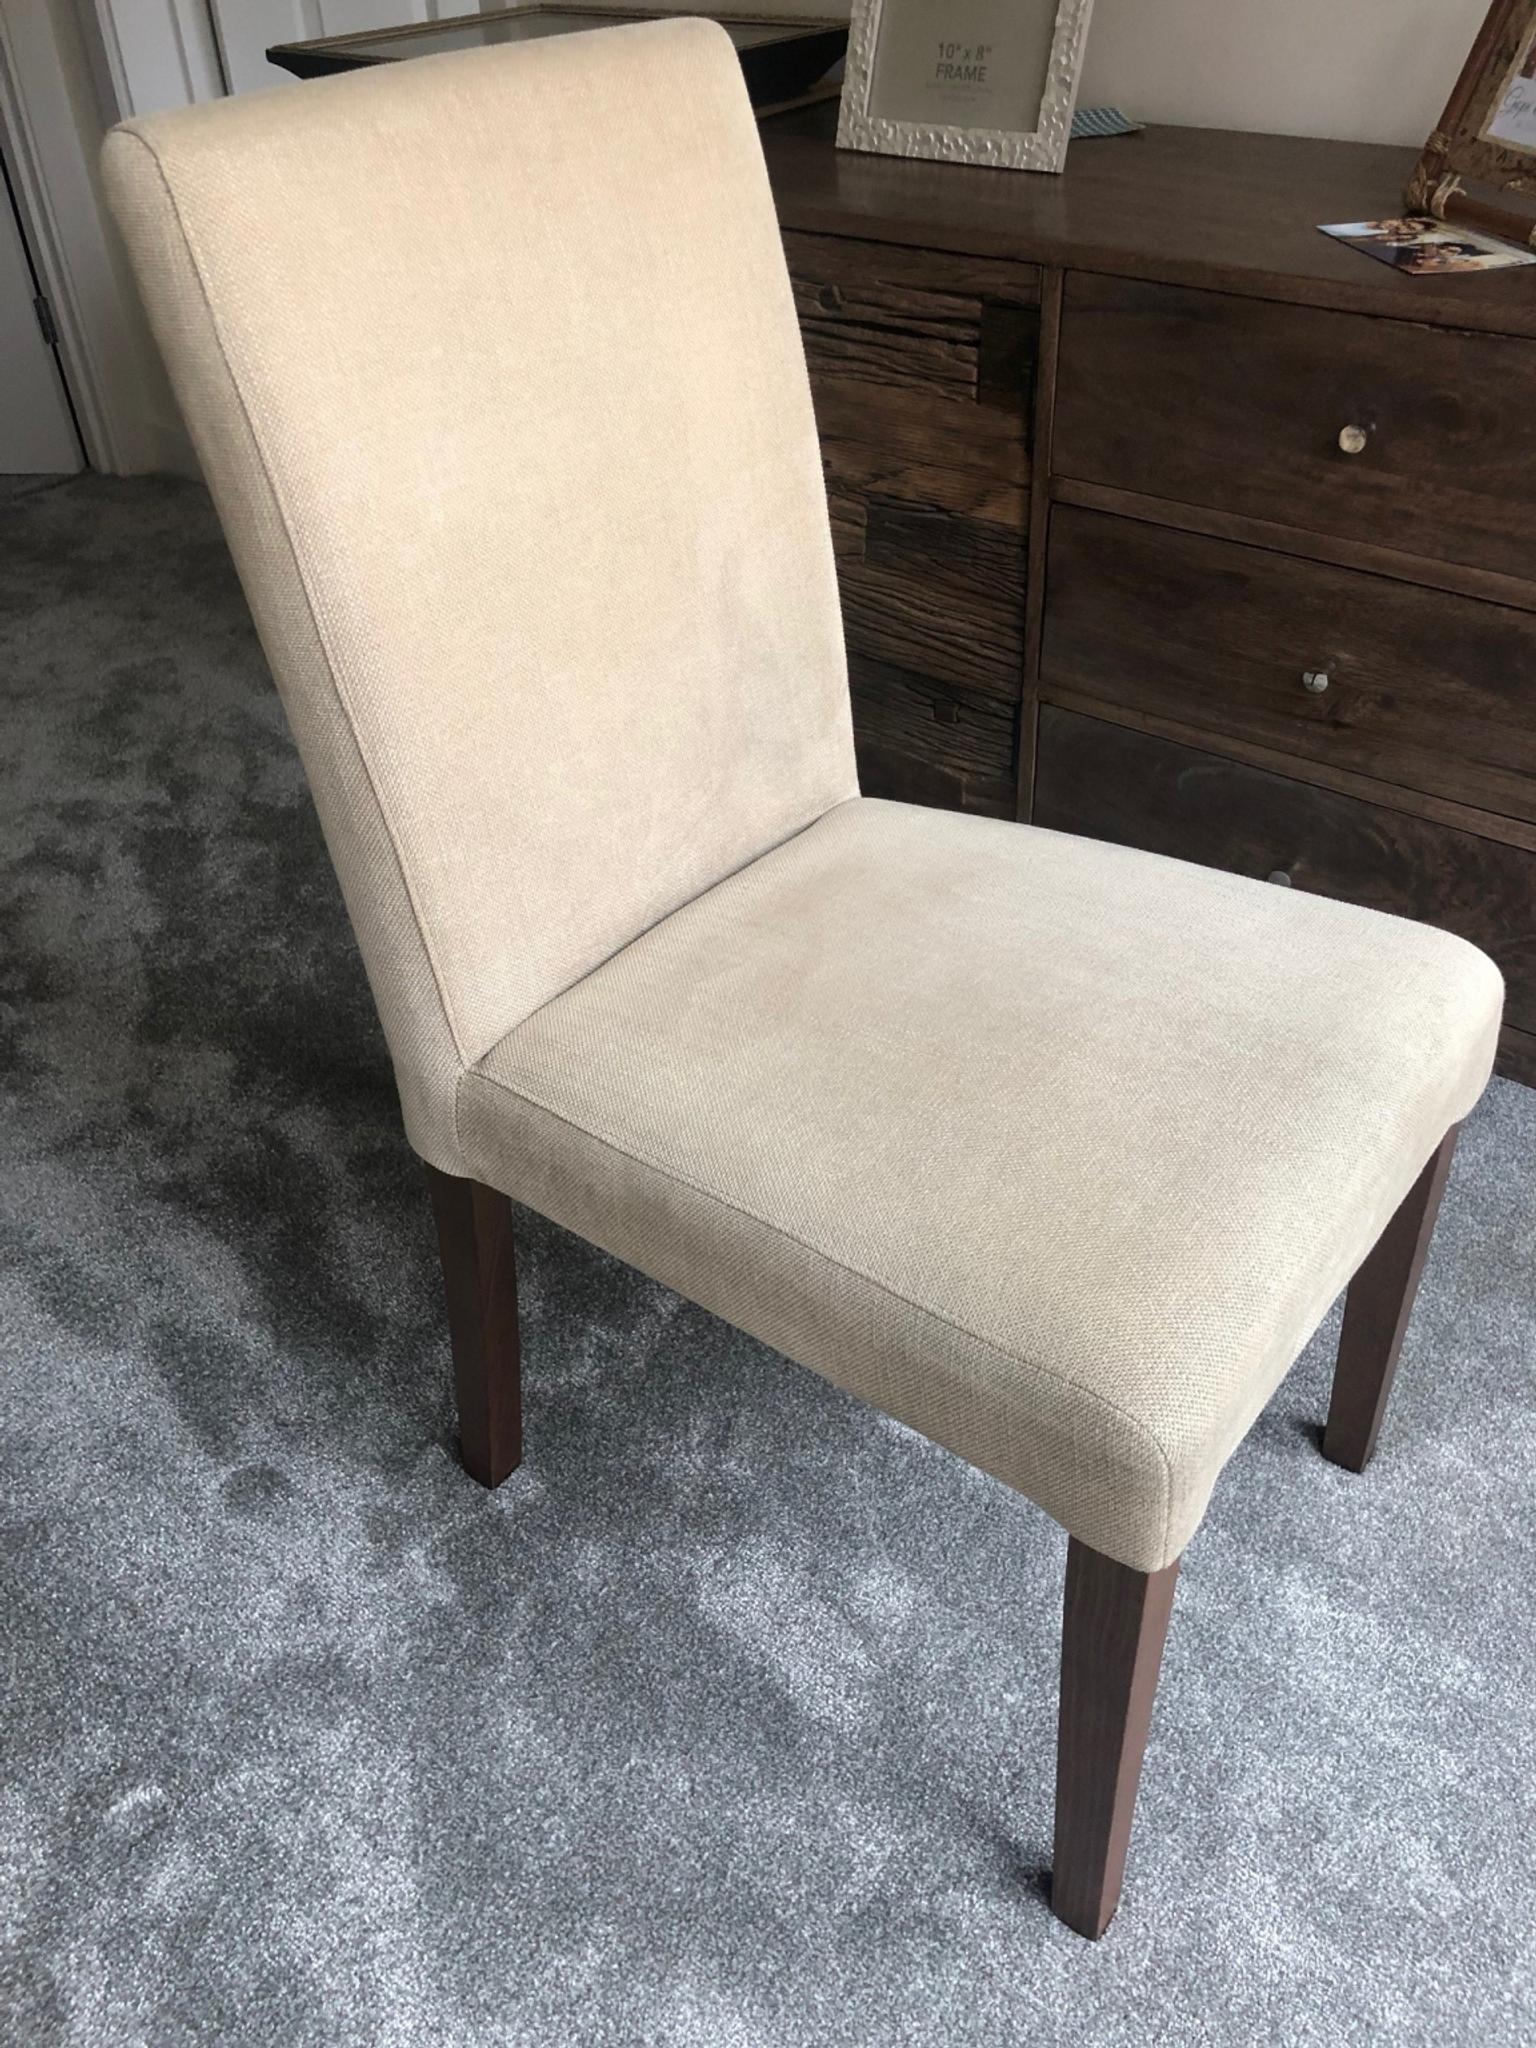 Dining Chairs X4 In B61 Bromsgrove For 150 00 For Sale Shpock